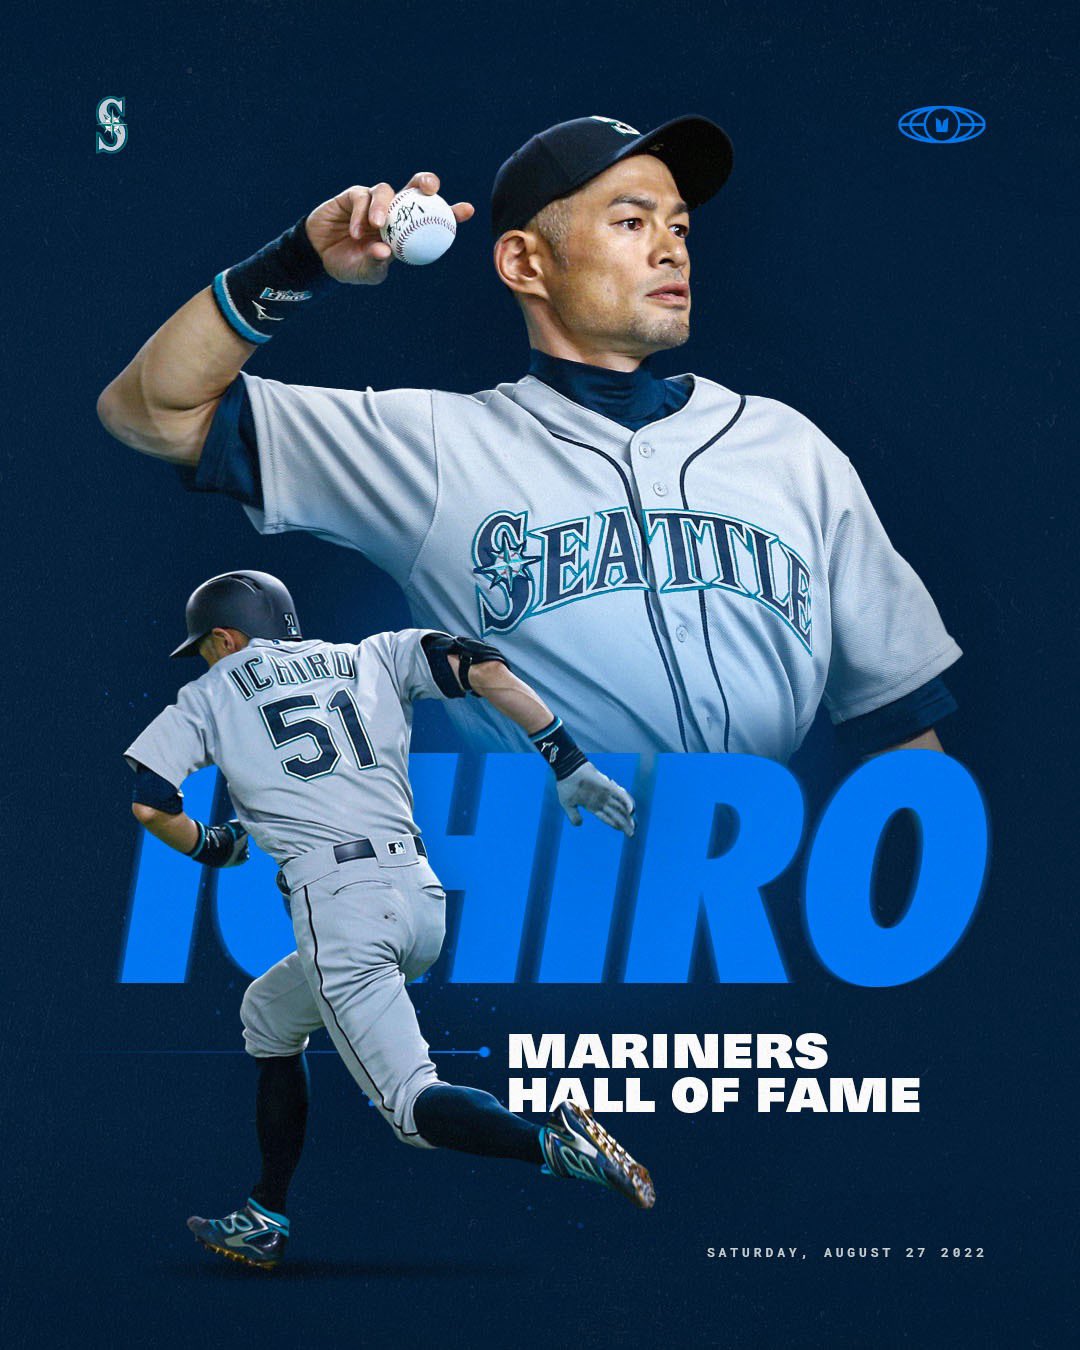 mariners hall of fame